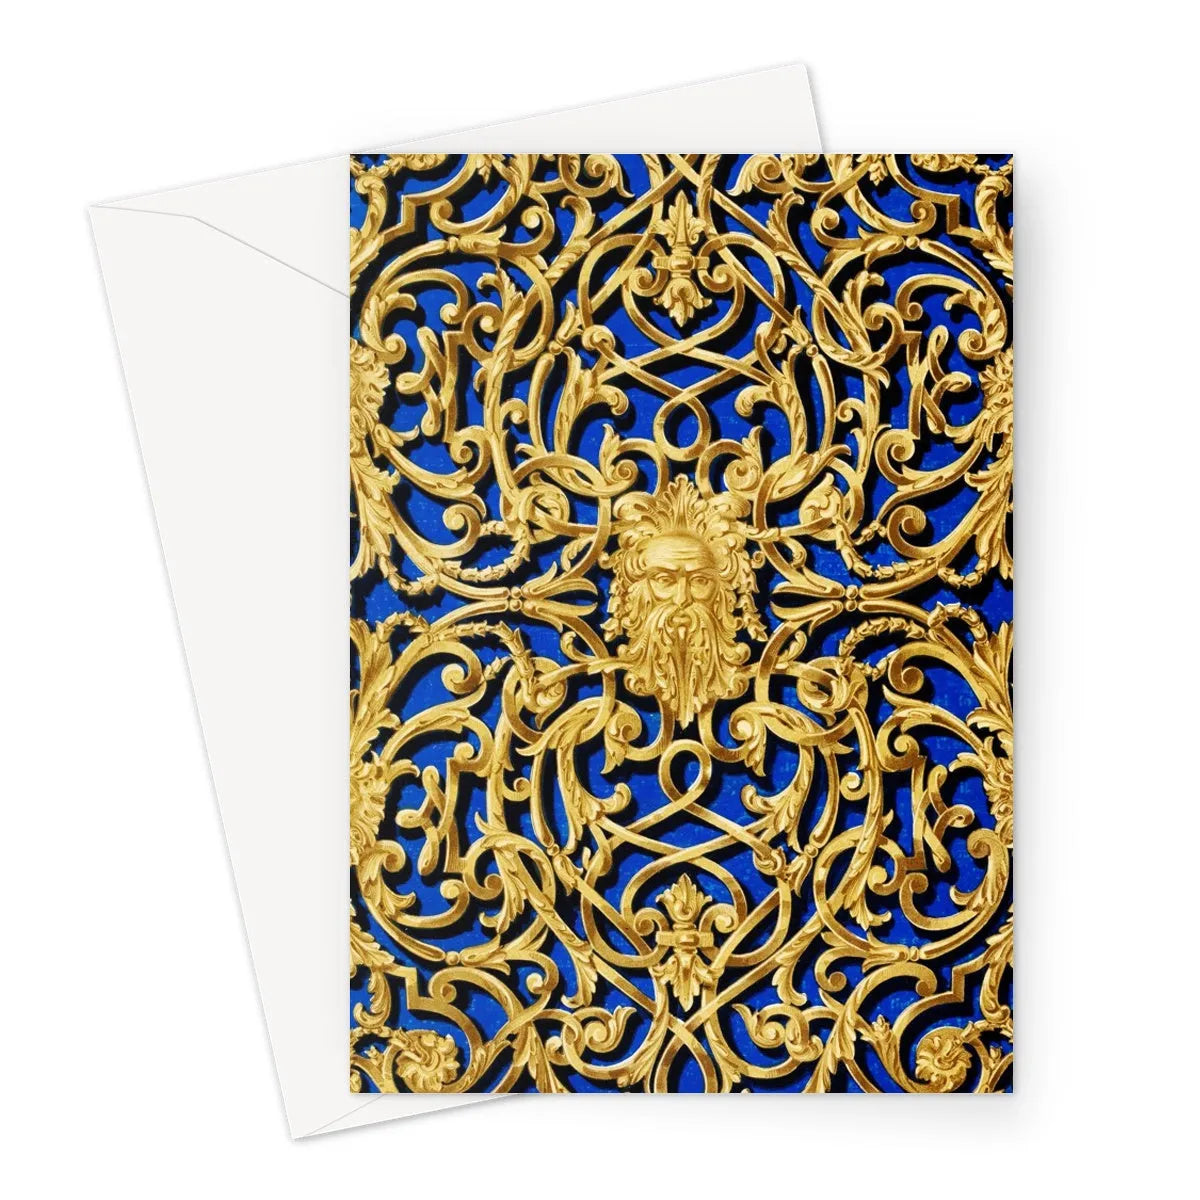 Open-work Panel By Sir Matthew Digby Wyatt Greeting Card - A5 Portrait / 1 Card - Greeting & Note Cards - Aesthetic Art